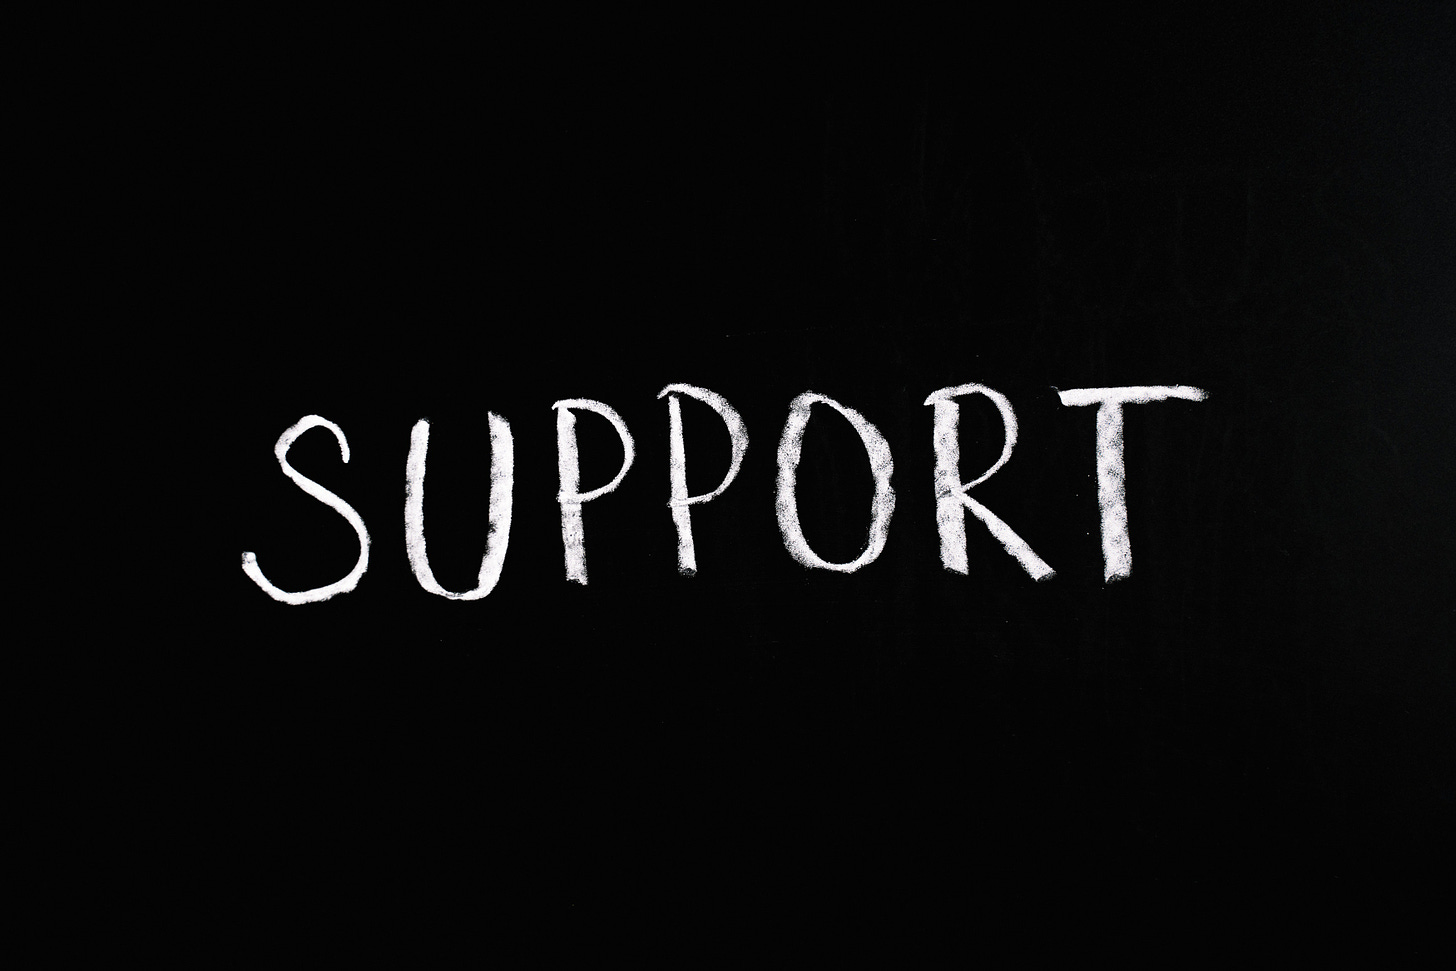 the word support written in white chalk on a black background